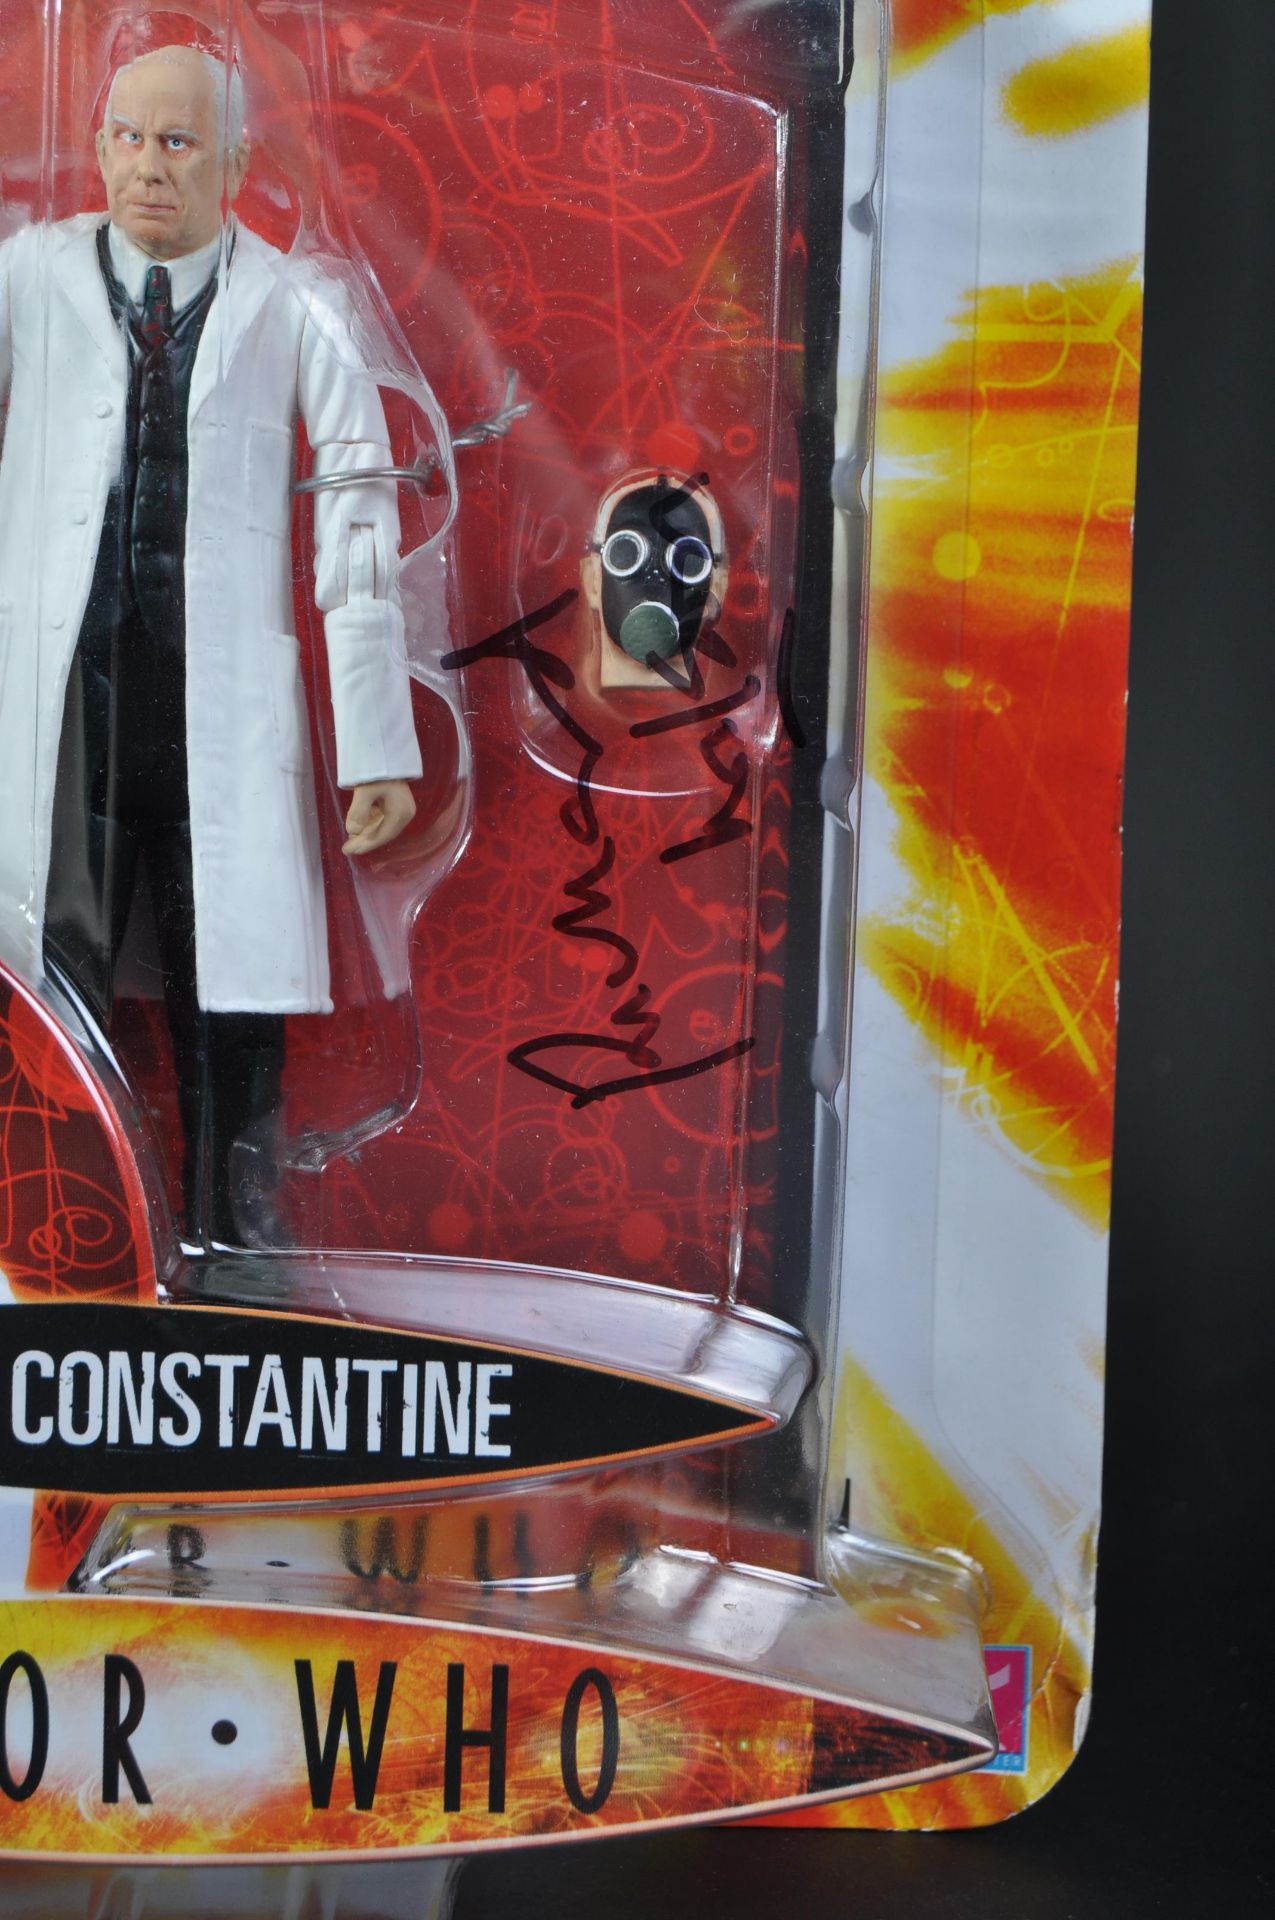 DOCTOR WHO - RICHARD WILSON - SIGNED ACTION FIGURE - Image 2 of 2